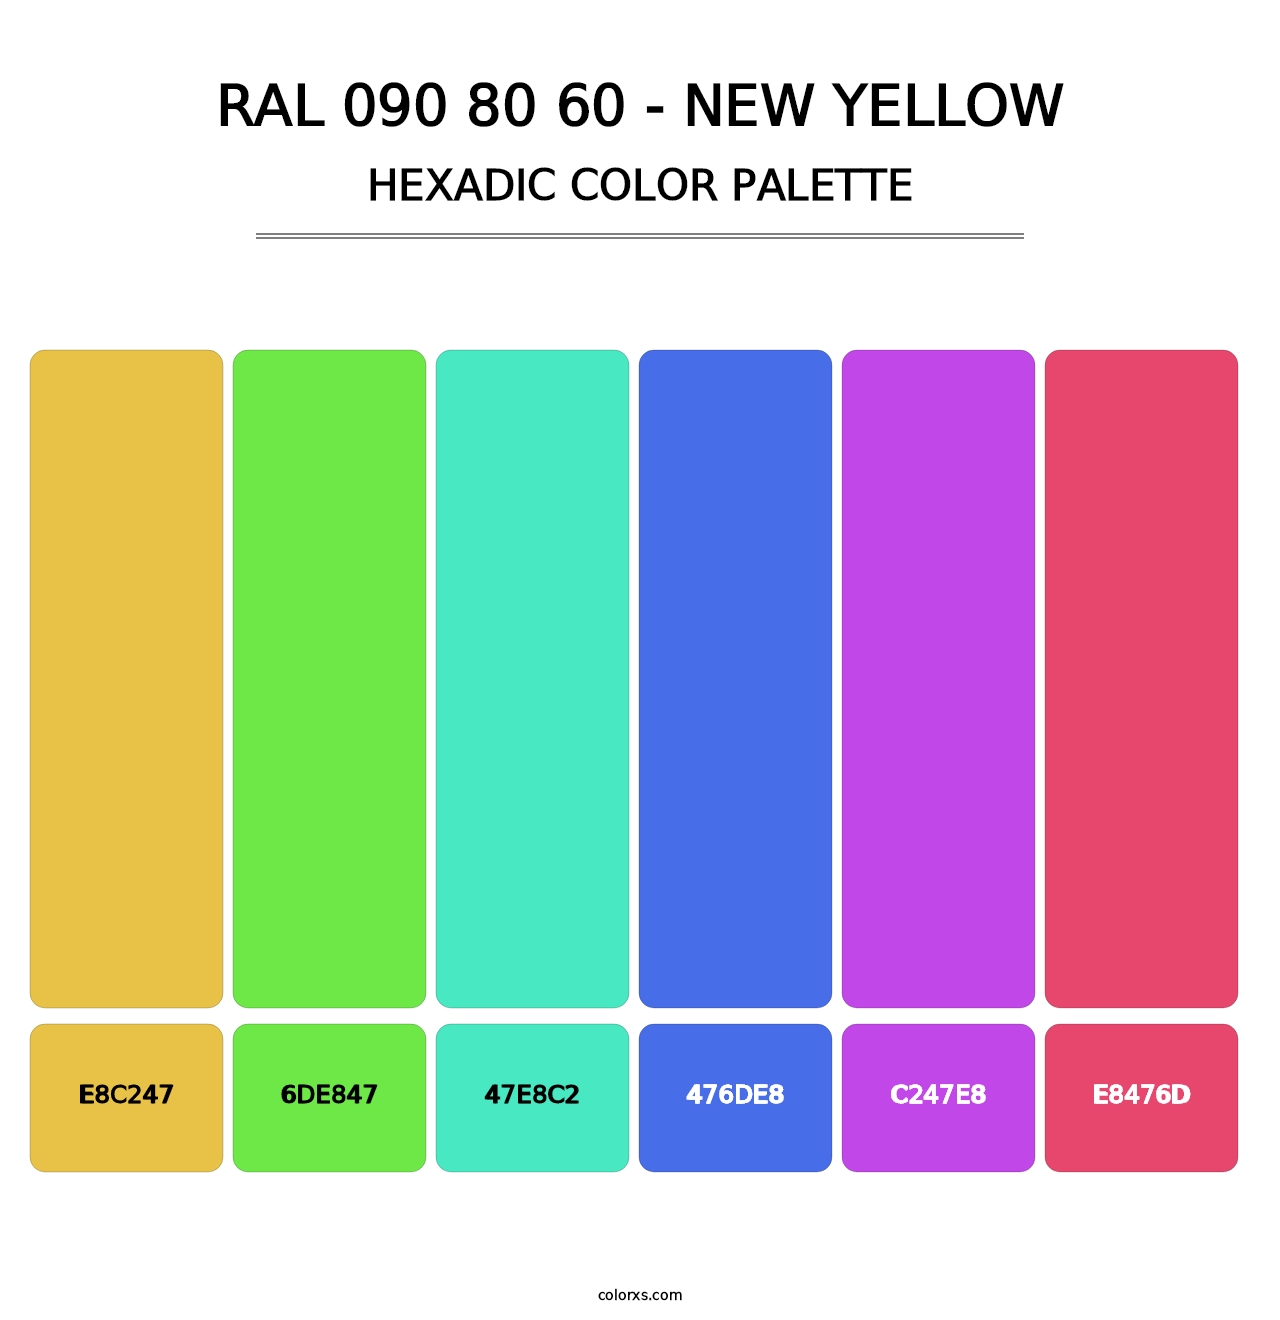 RAL 090 80 60 - New Yellow - Hexadic Color Palette